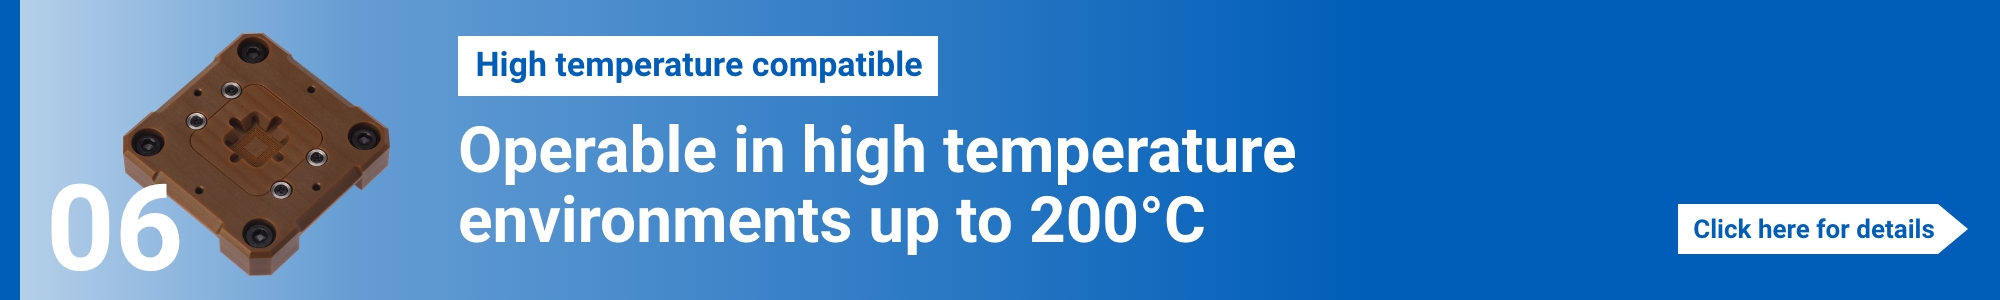 [High temperature compatible]Operable in high temperature environments up to 200°C. Click here for details